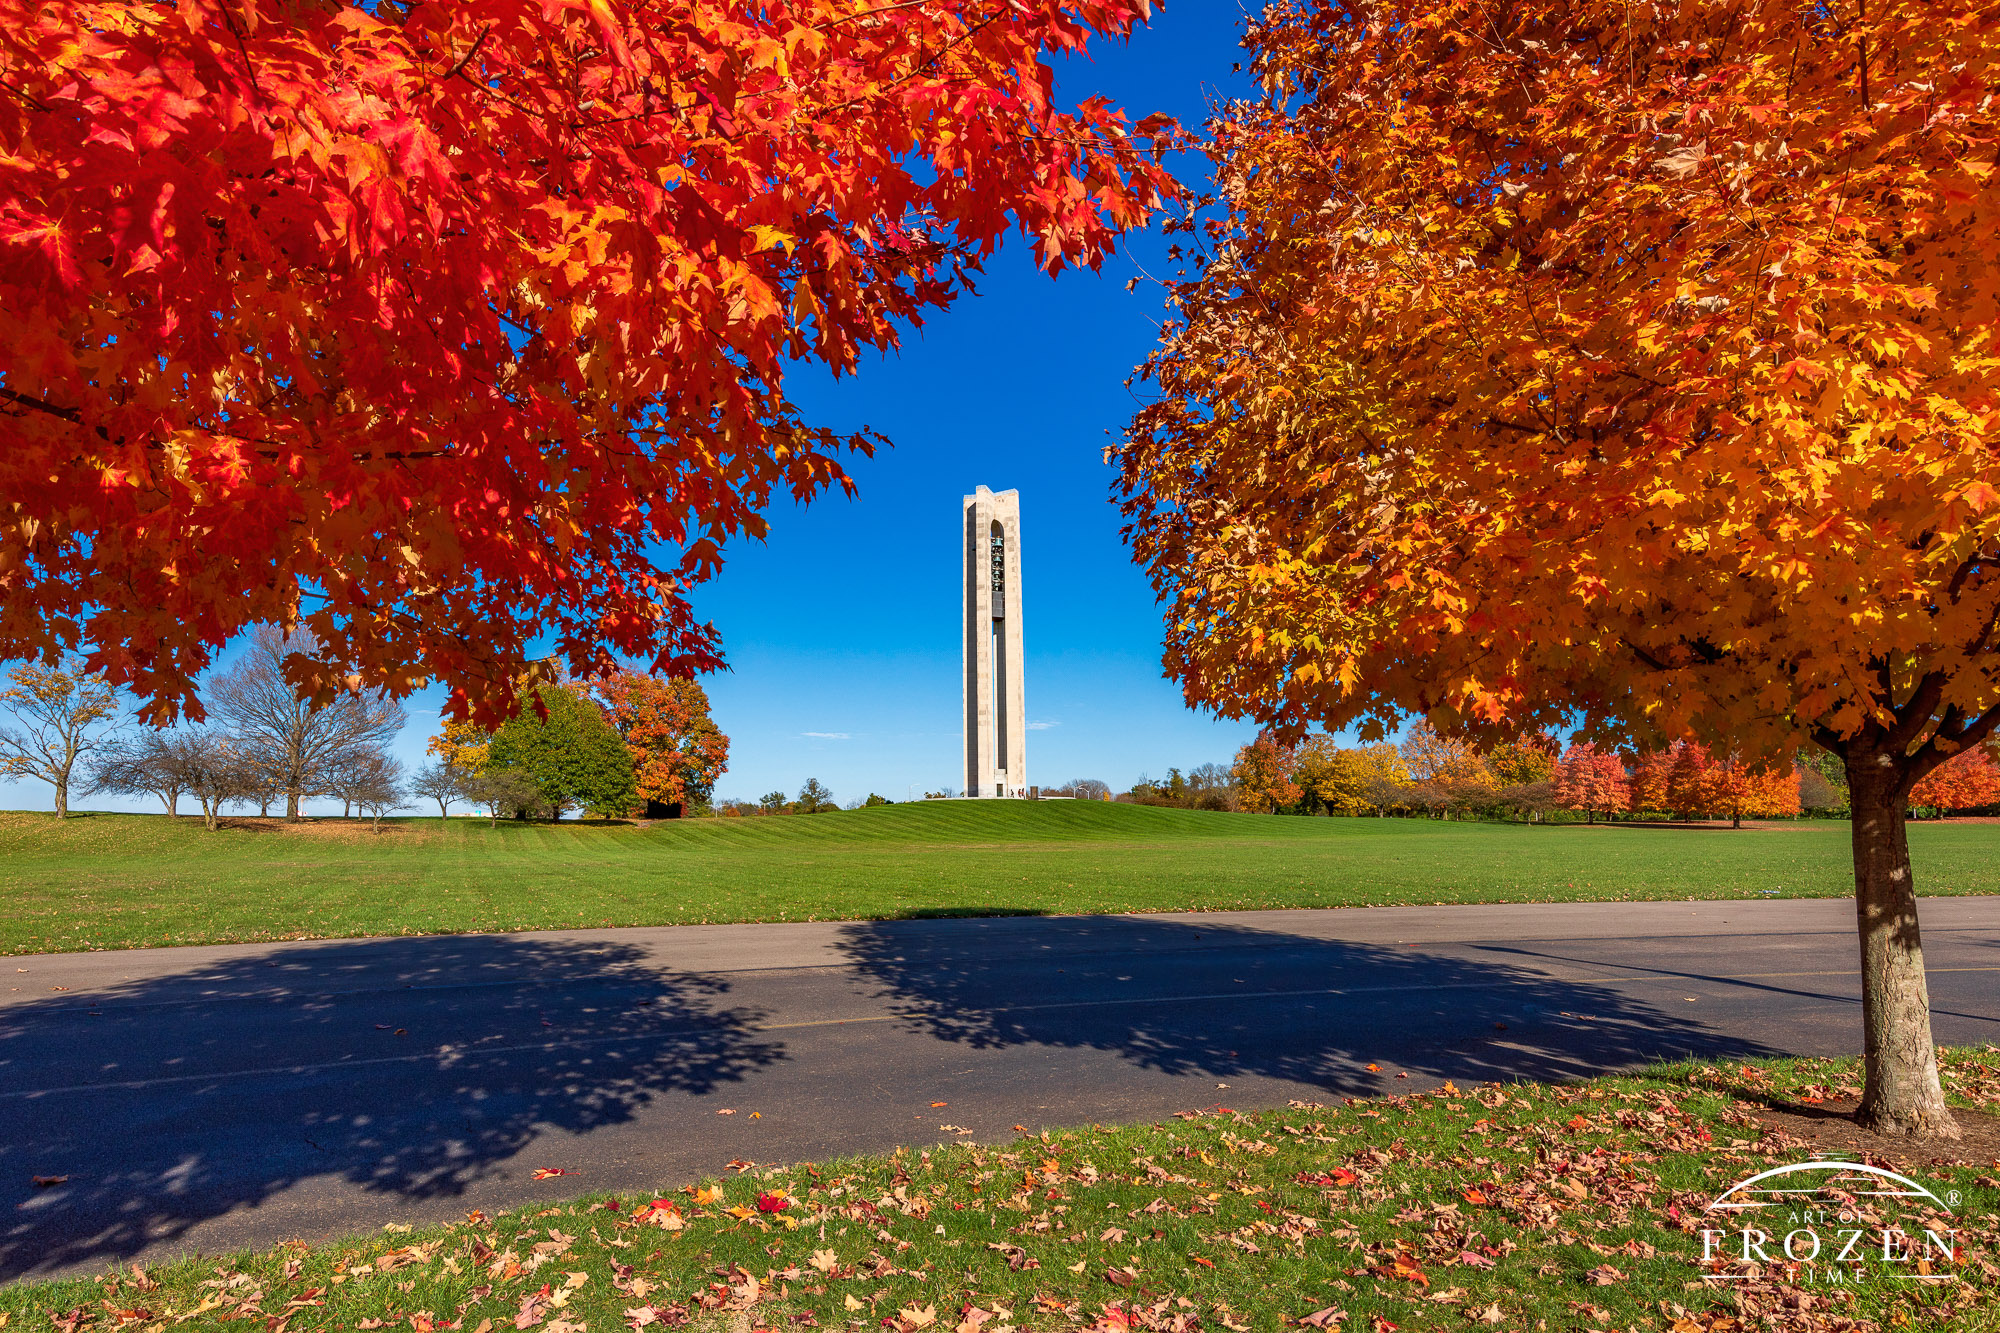 A view of blue sky and Deed Carillon Bell Tower through brilliantly colored autumn trees